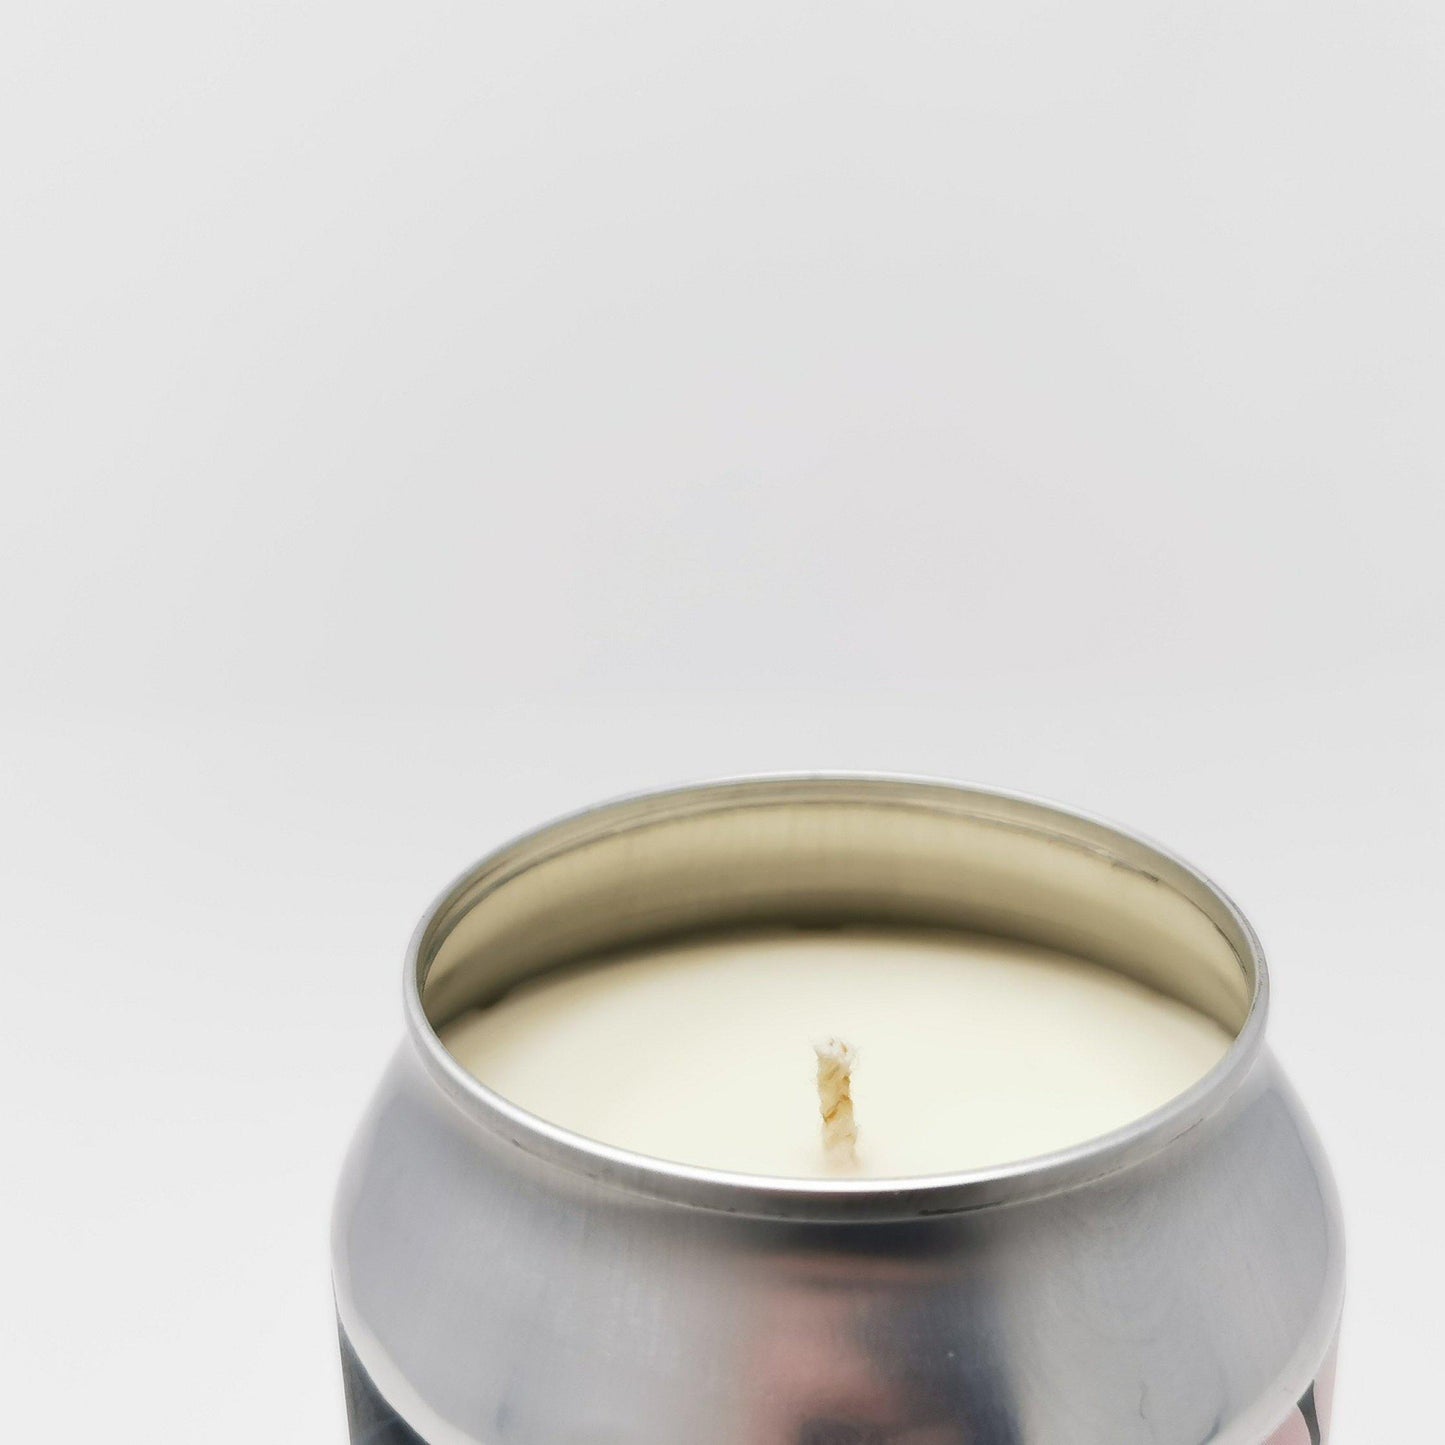 Pollys Ode Craft Beer Can Candle-Beer Can Candles-Adhock Homeware